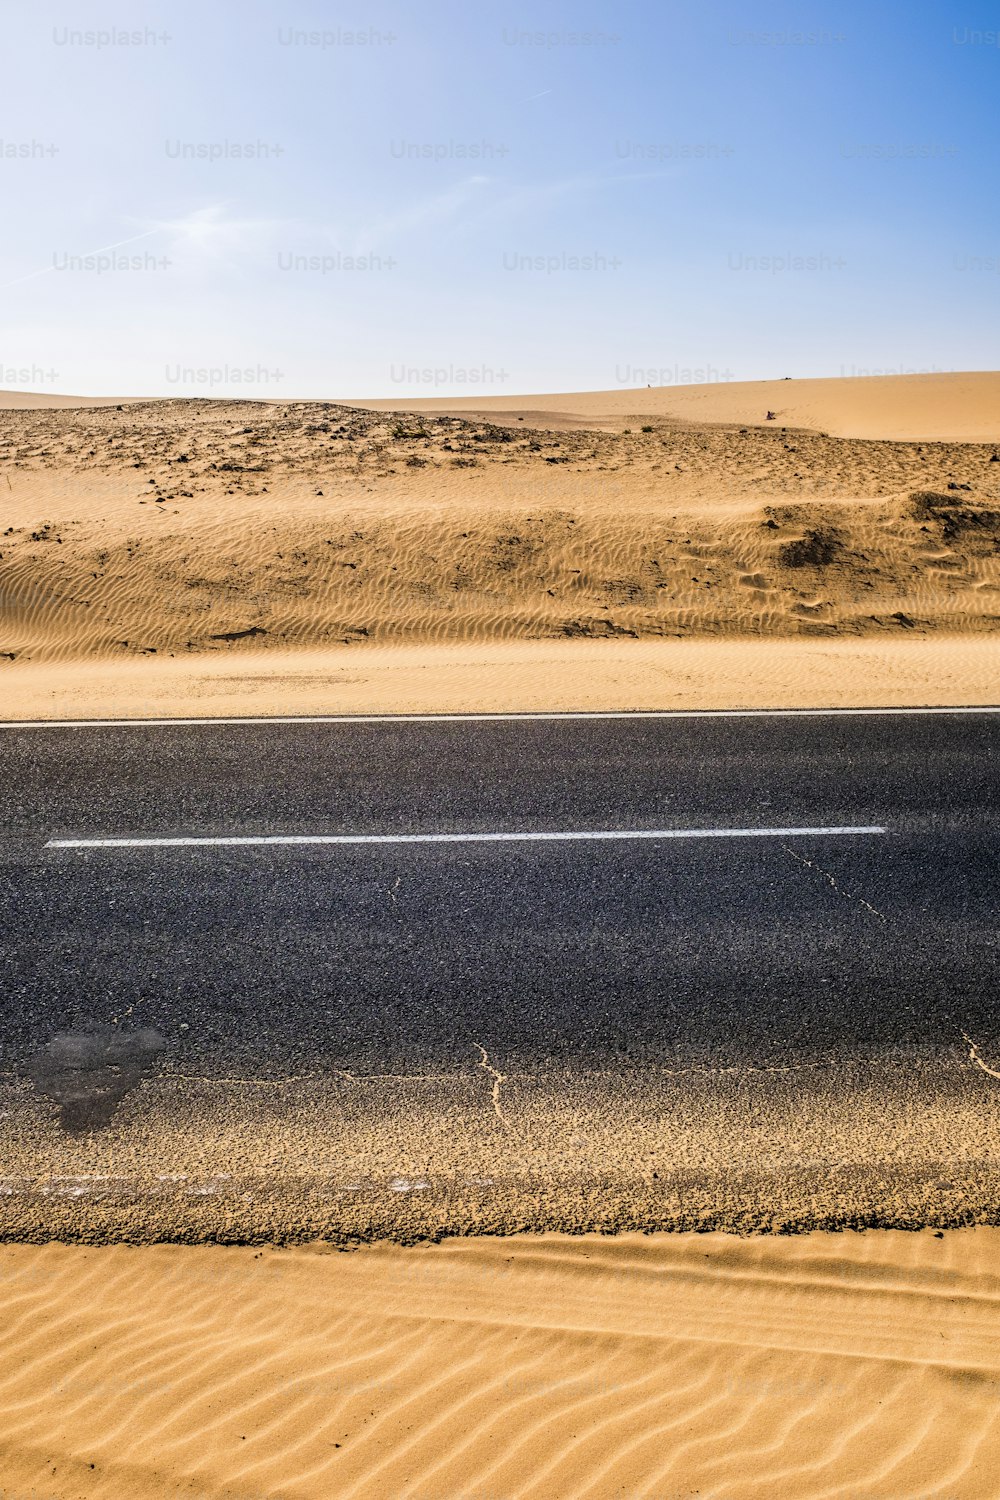 Black asphalt road with sand dunes and desert on left and right and blue sky in background  - travel concept in arid desertic world due a bad climate change future - water emergency planet